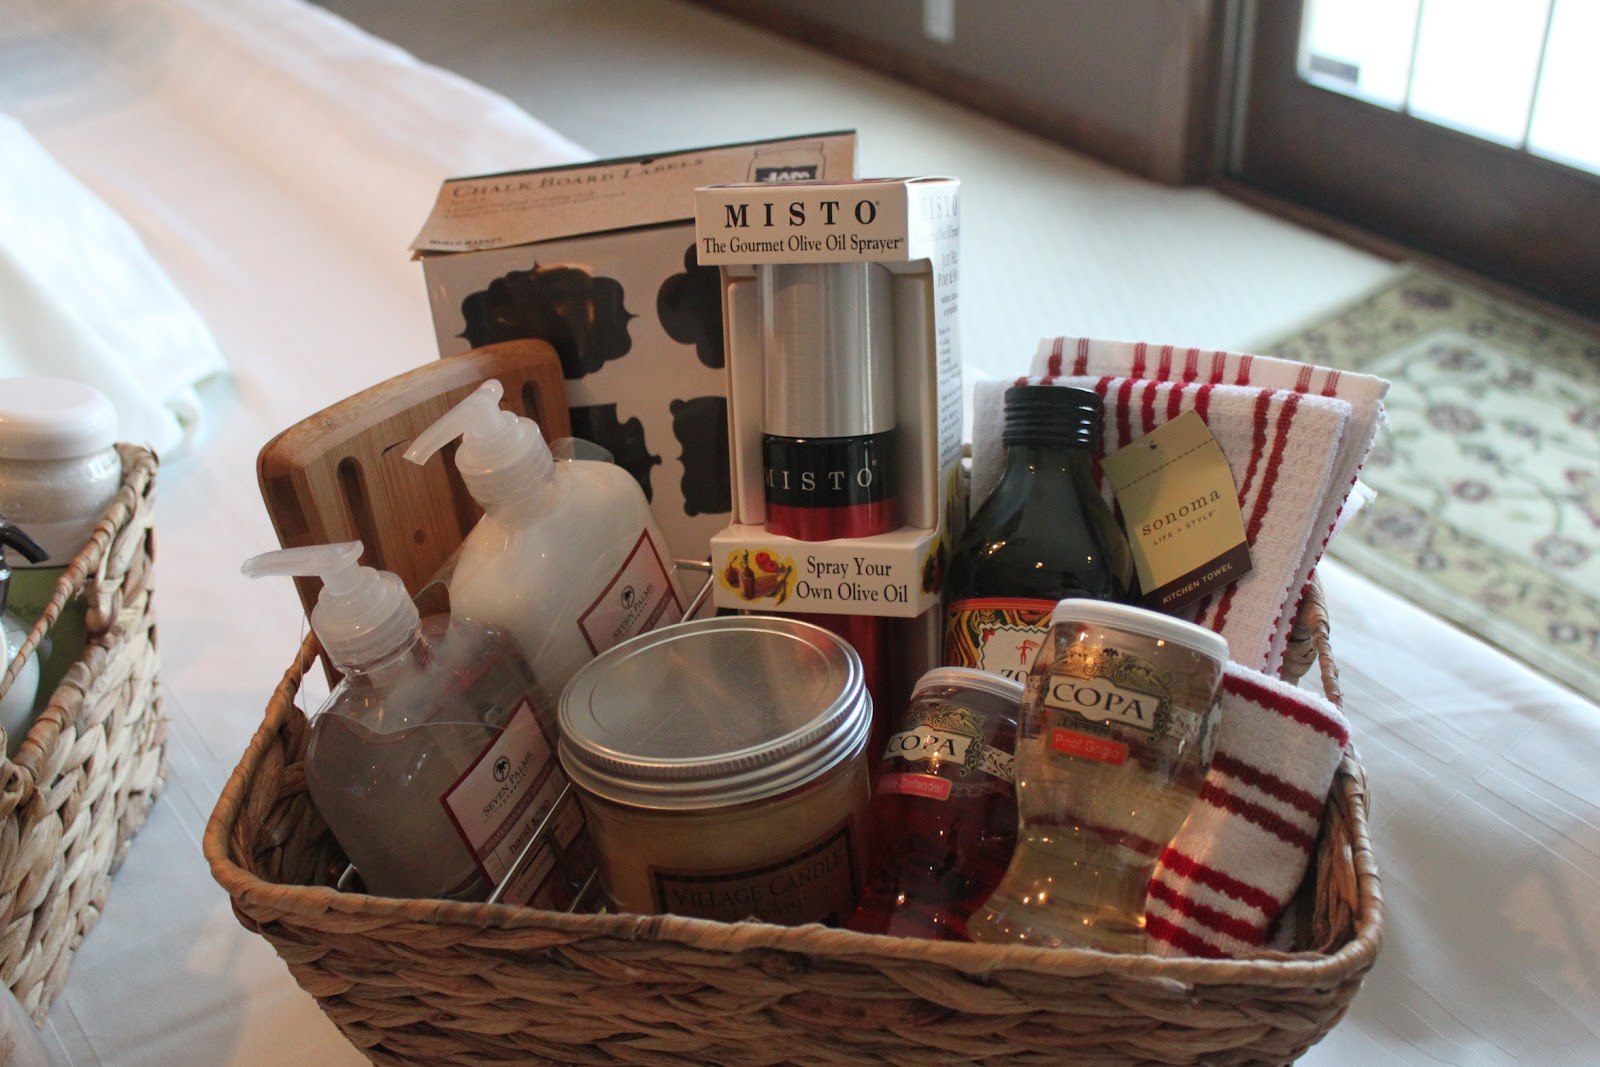 Kitchen Themed Gift Basket Ideas
 websentials and design A little peanut is ing